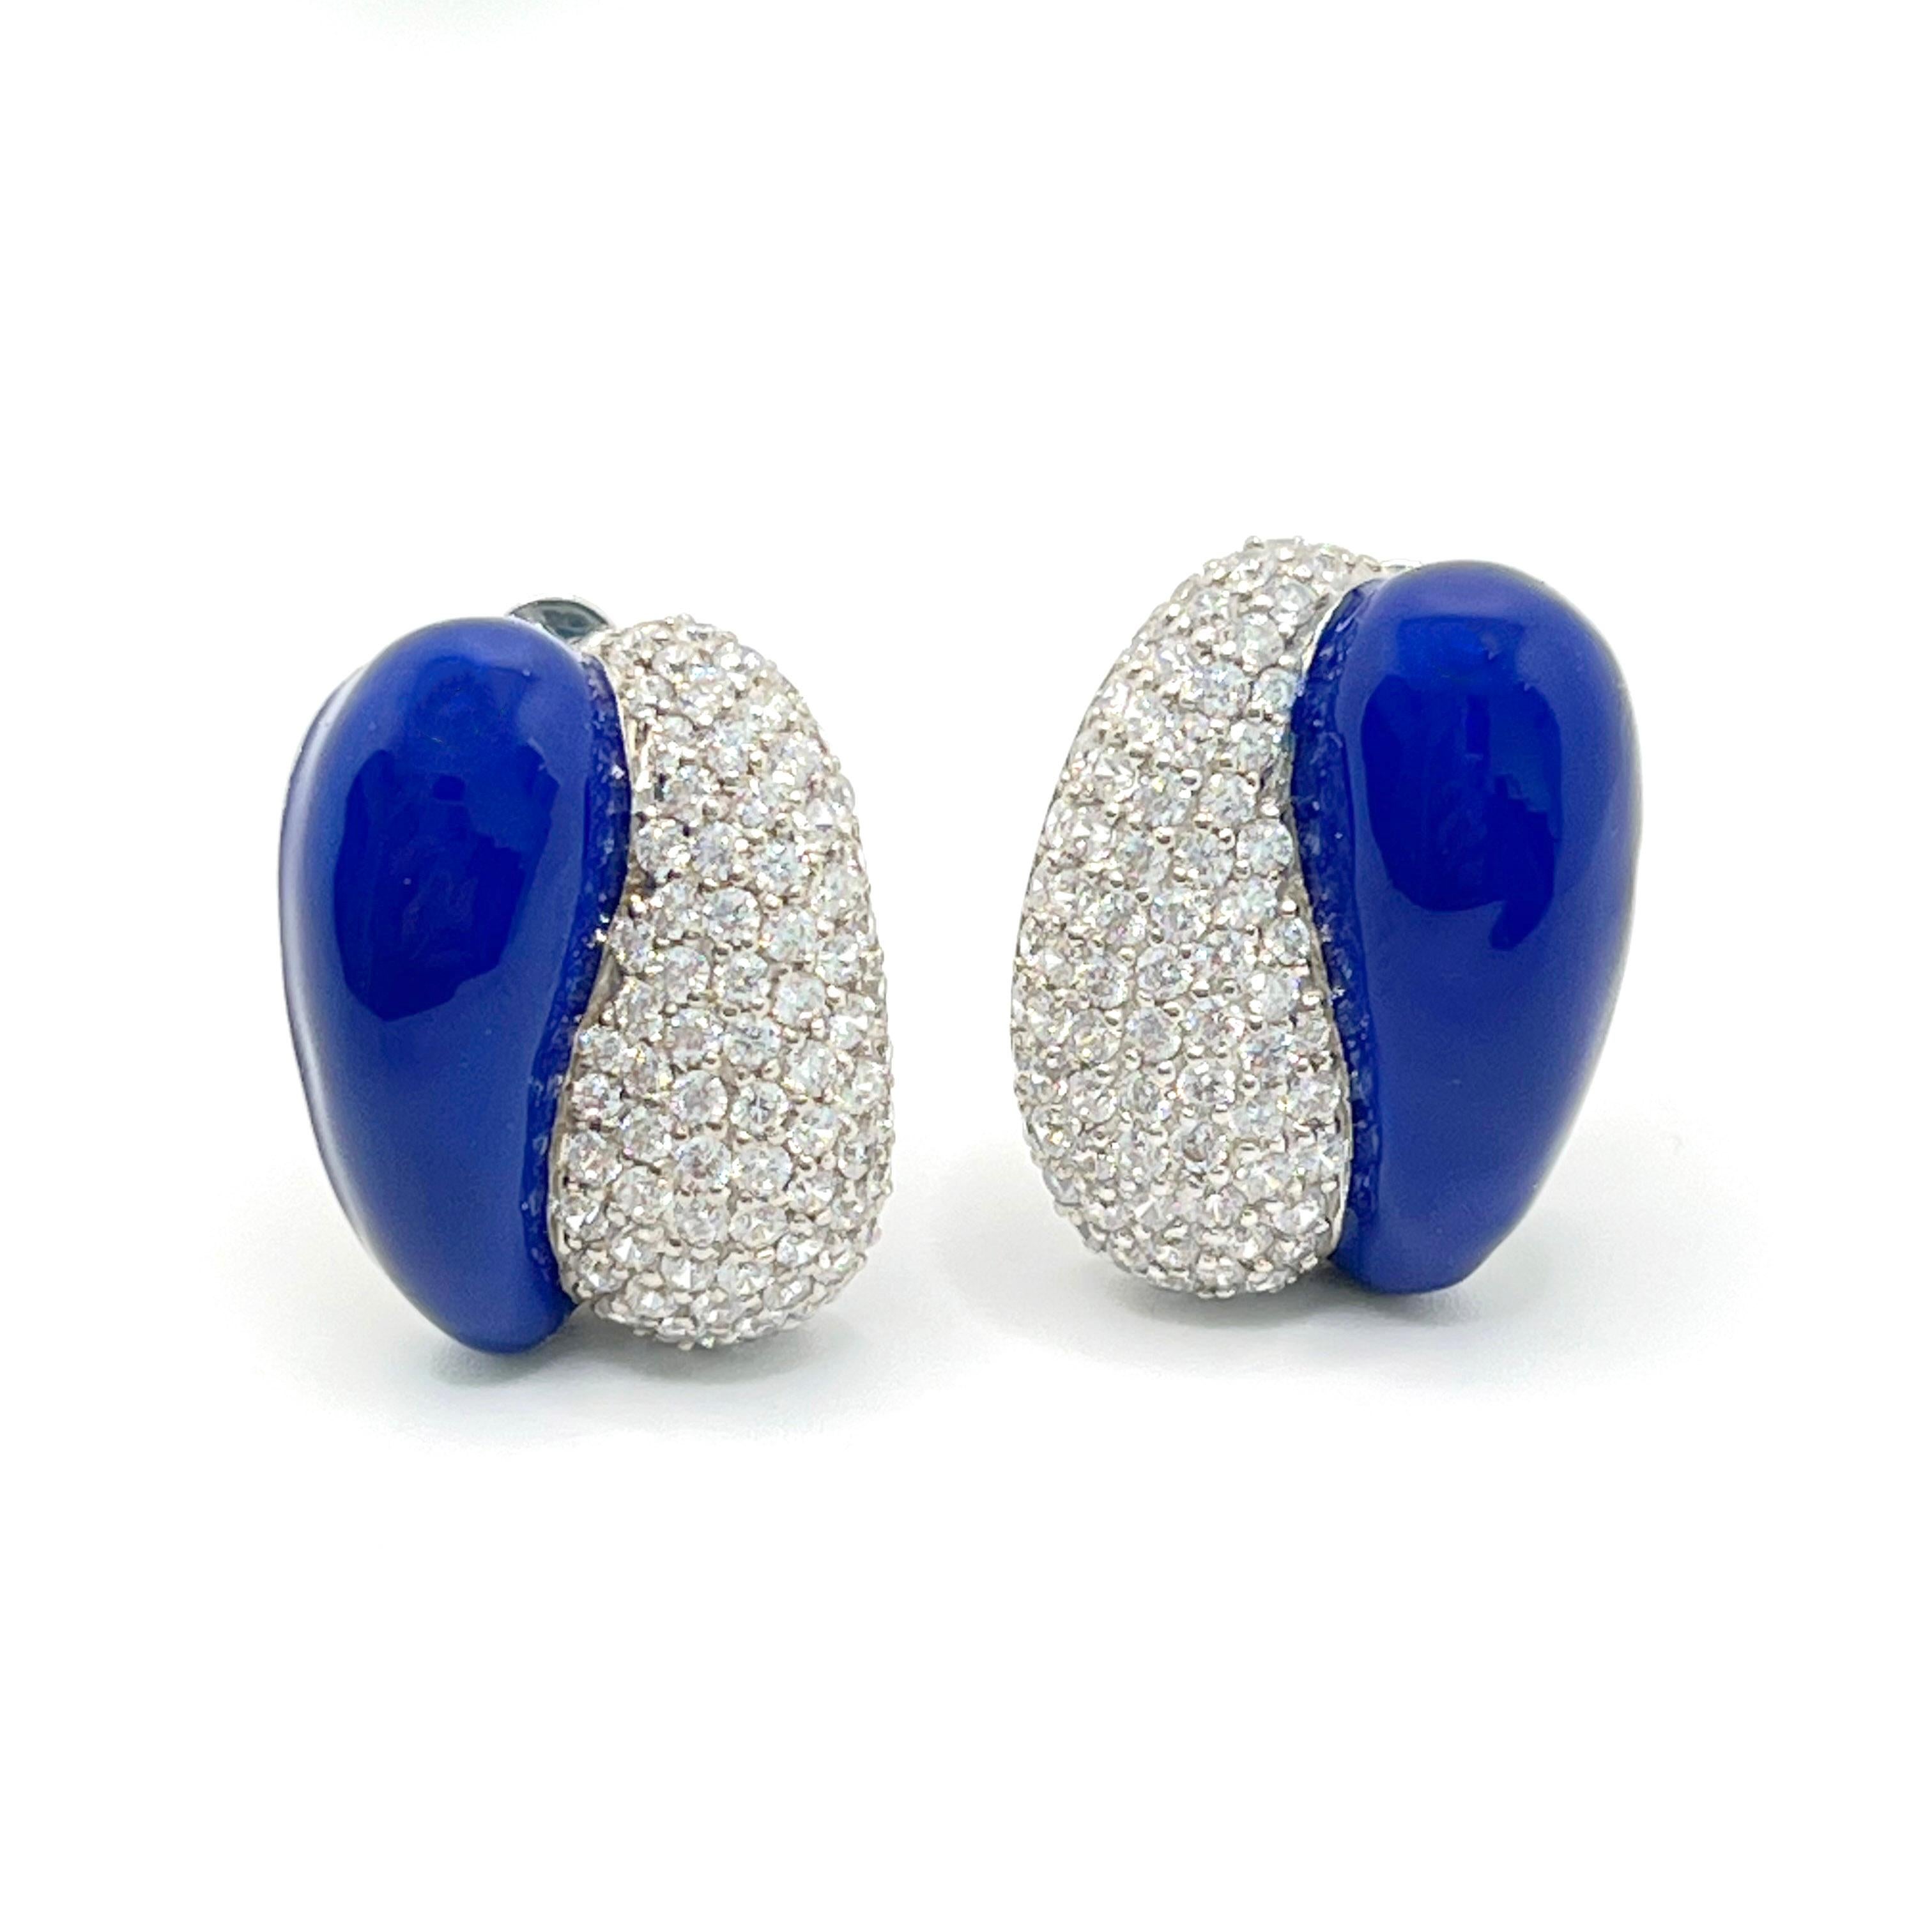 Half Royal Blue Enamel Half Pave Simulated Diamond Clip-on Earrings

These classic and sophisticate-style earrings feature over 160pcs of round simulated diamond cz  handset in platinum rhodium plated sterling silver and layered over with beautiful